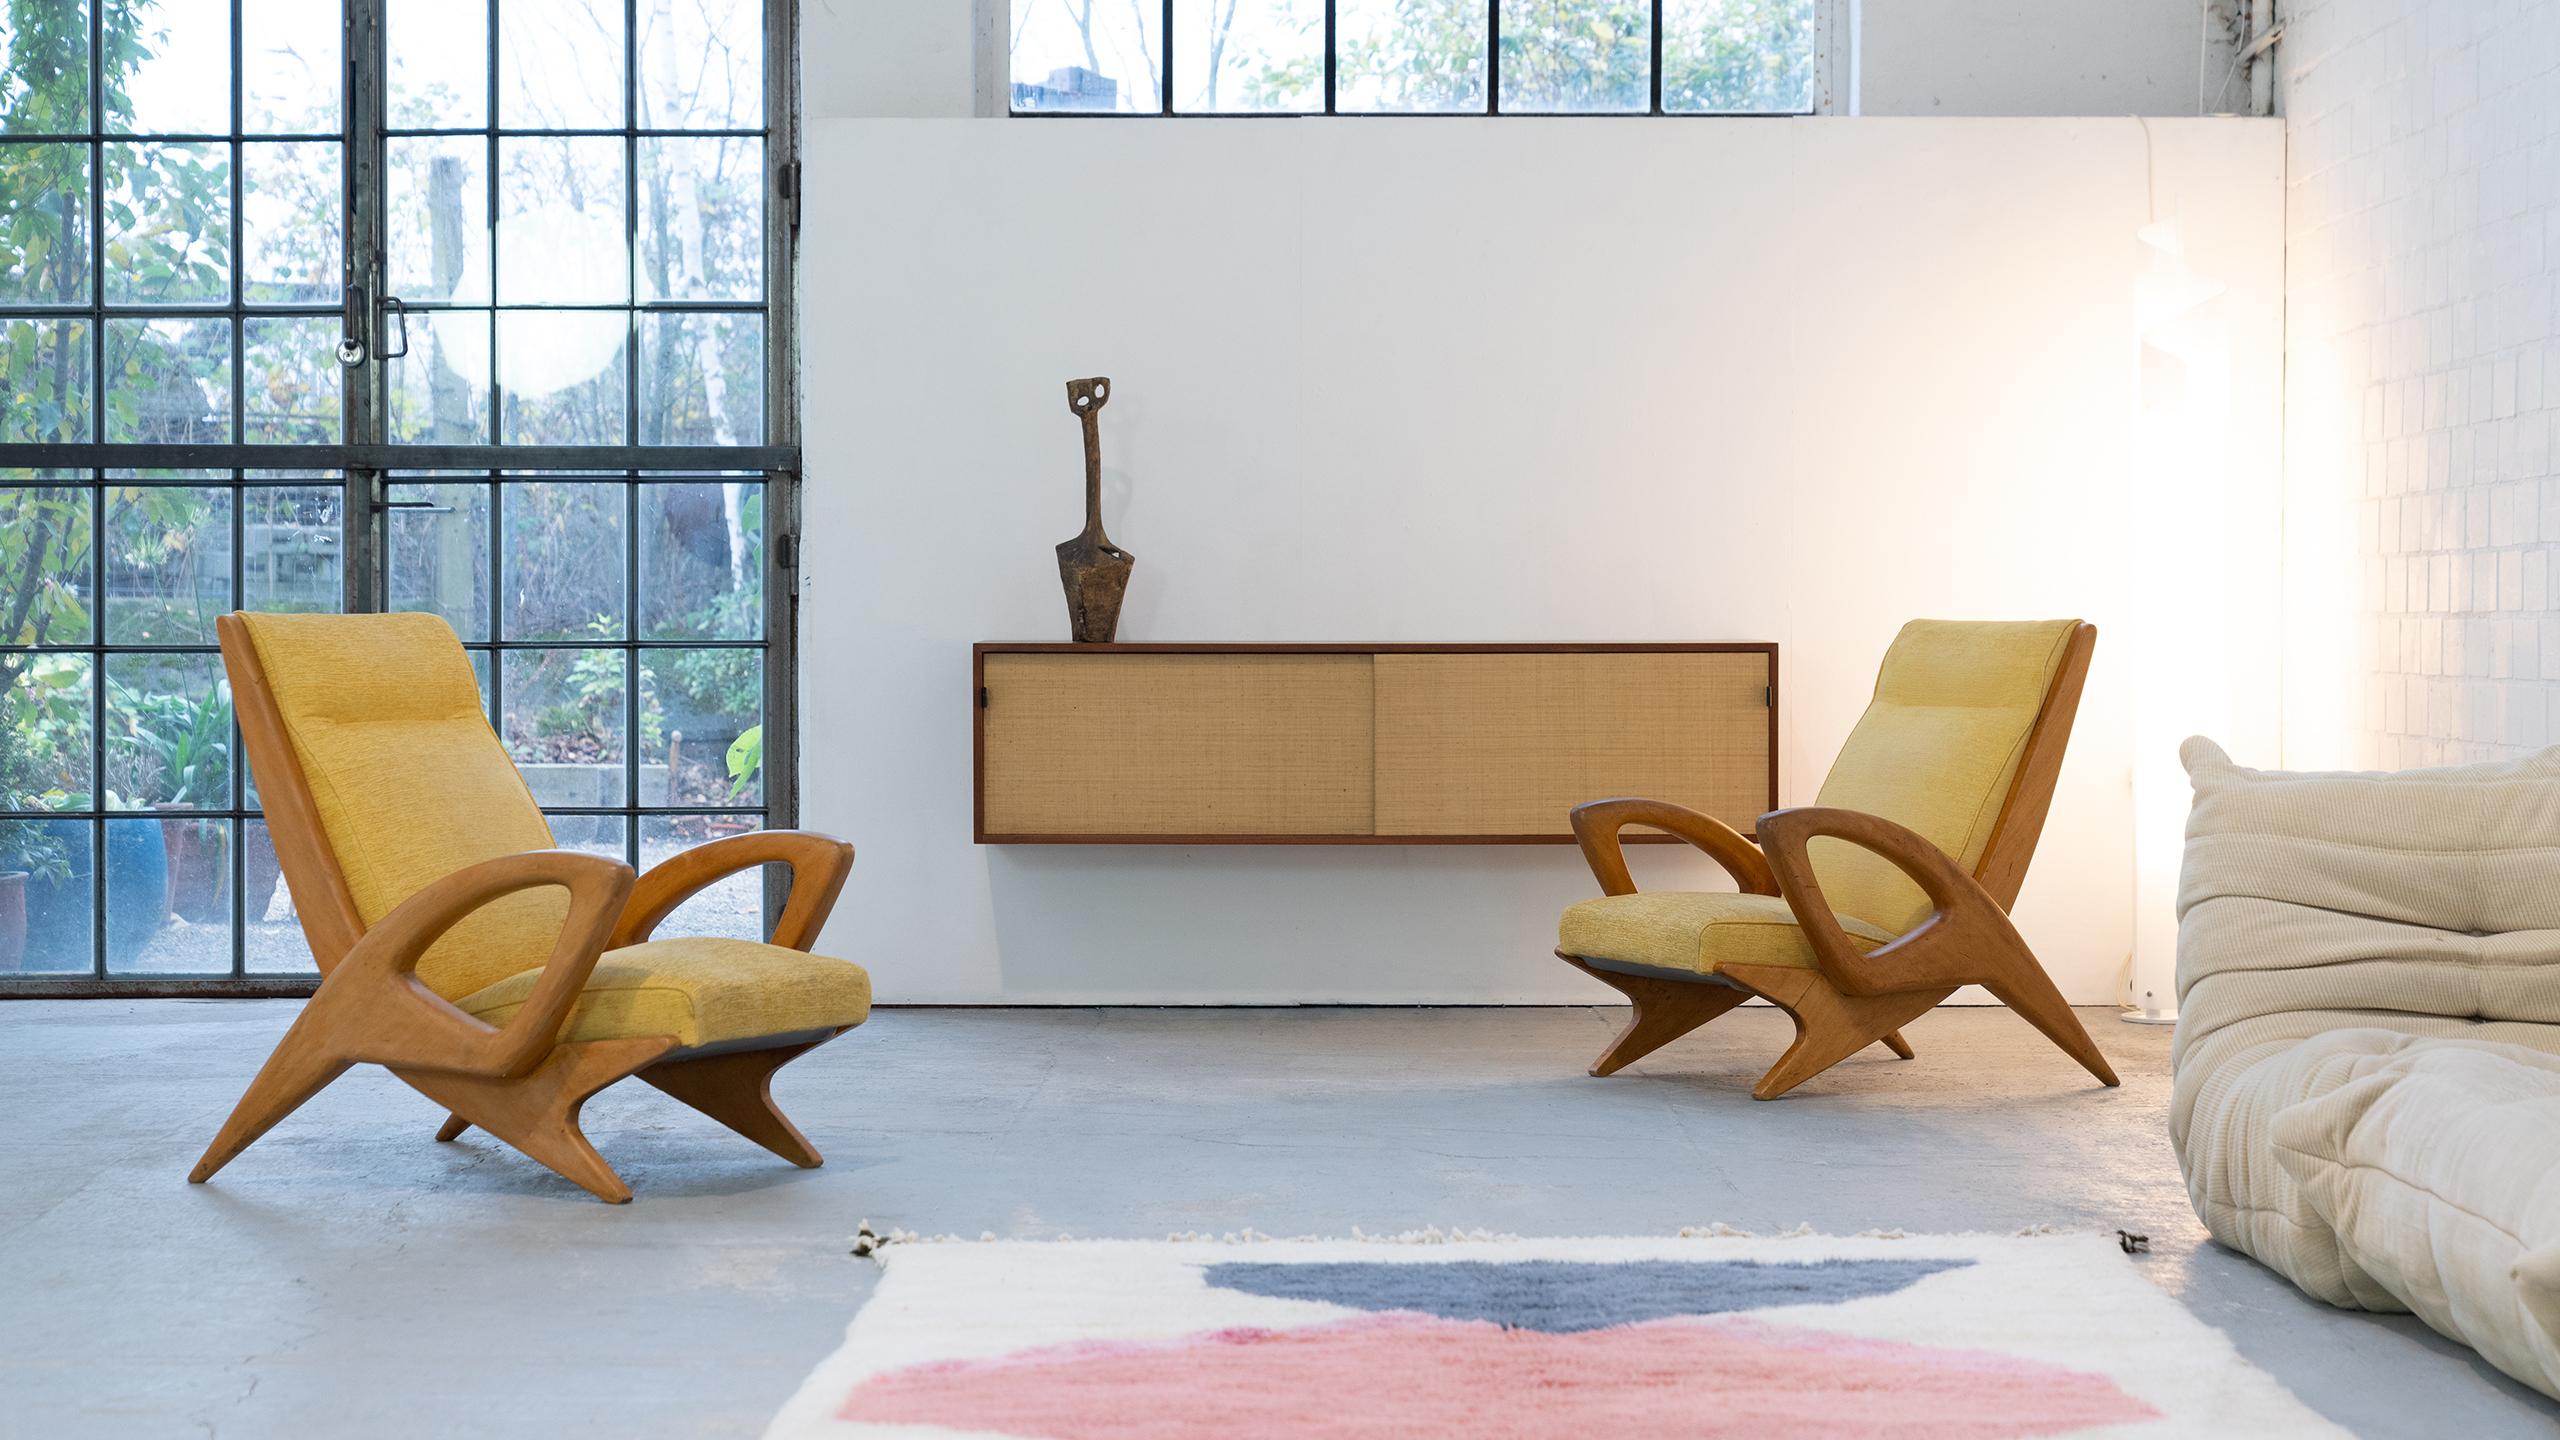 This pair of sculptural armchairs comes from a private collection of modern wooden designs in France. The collection includes virtually the complete range of French designers, such as Pierre Chapo, Charlotte Perriand, Georges Candilis and